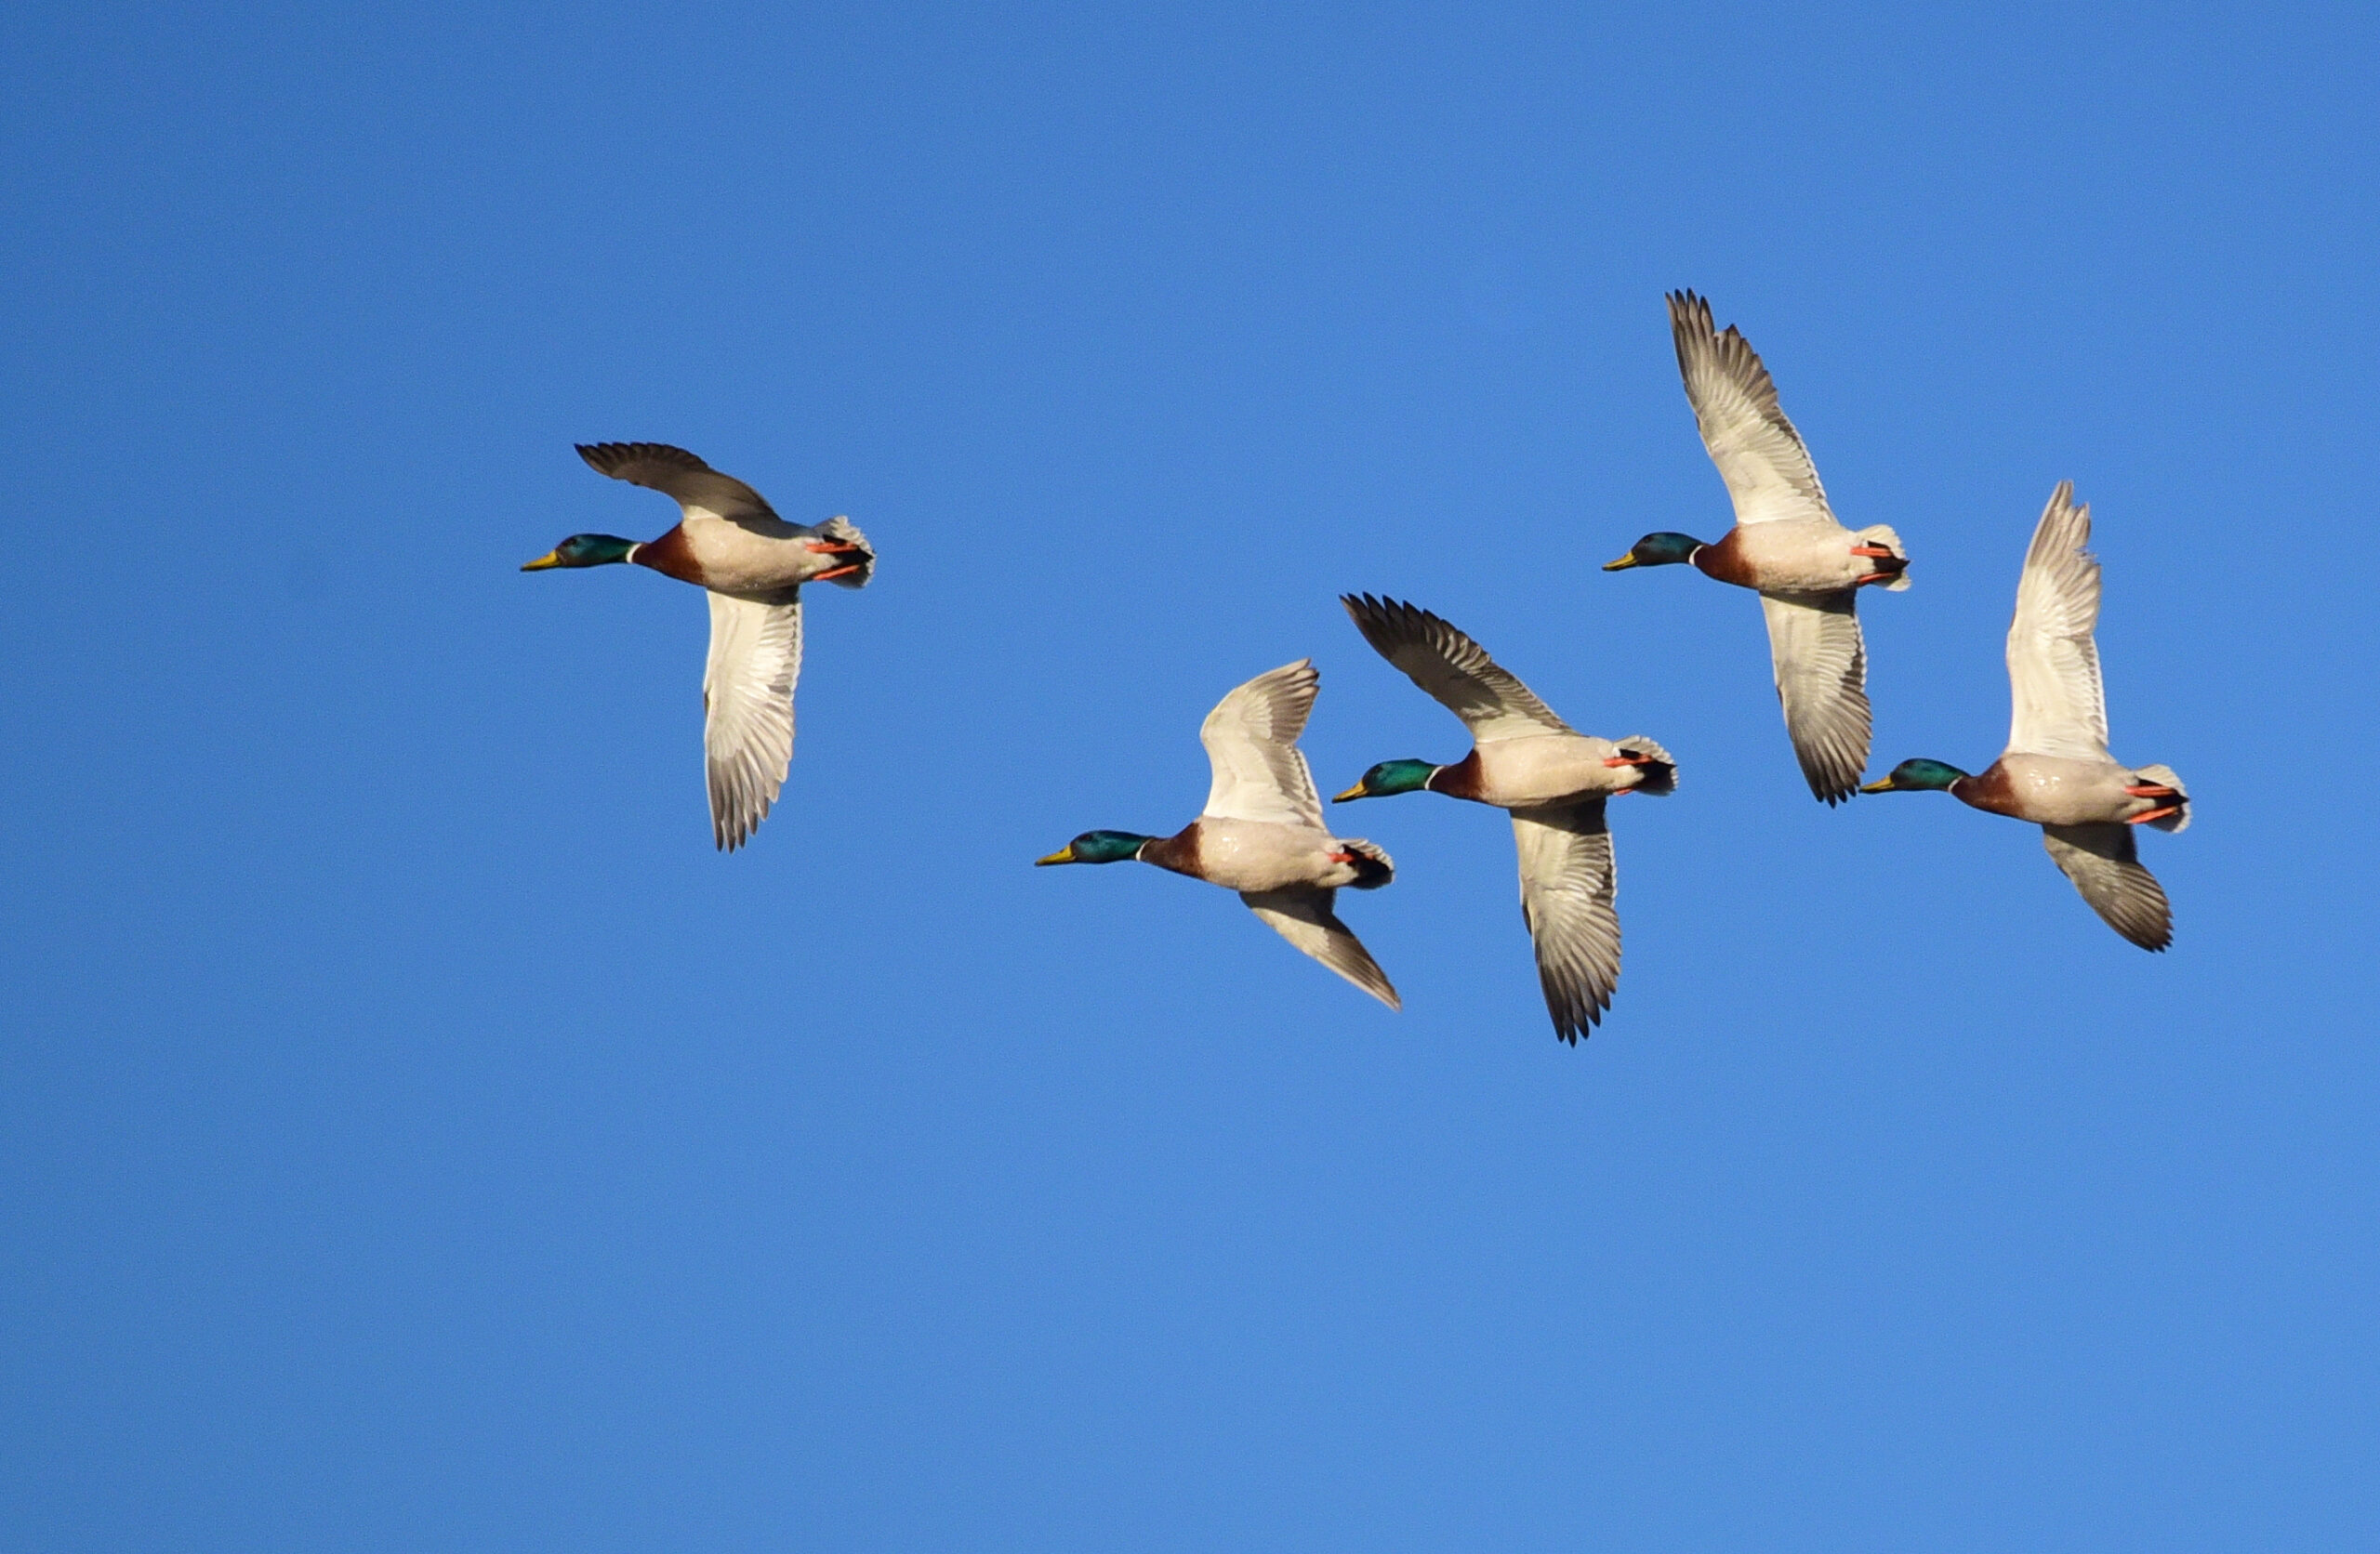 USFWS studies show the duck crippling rate is one in five birds.